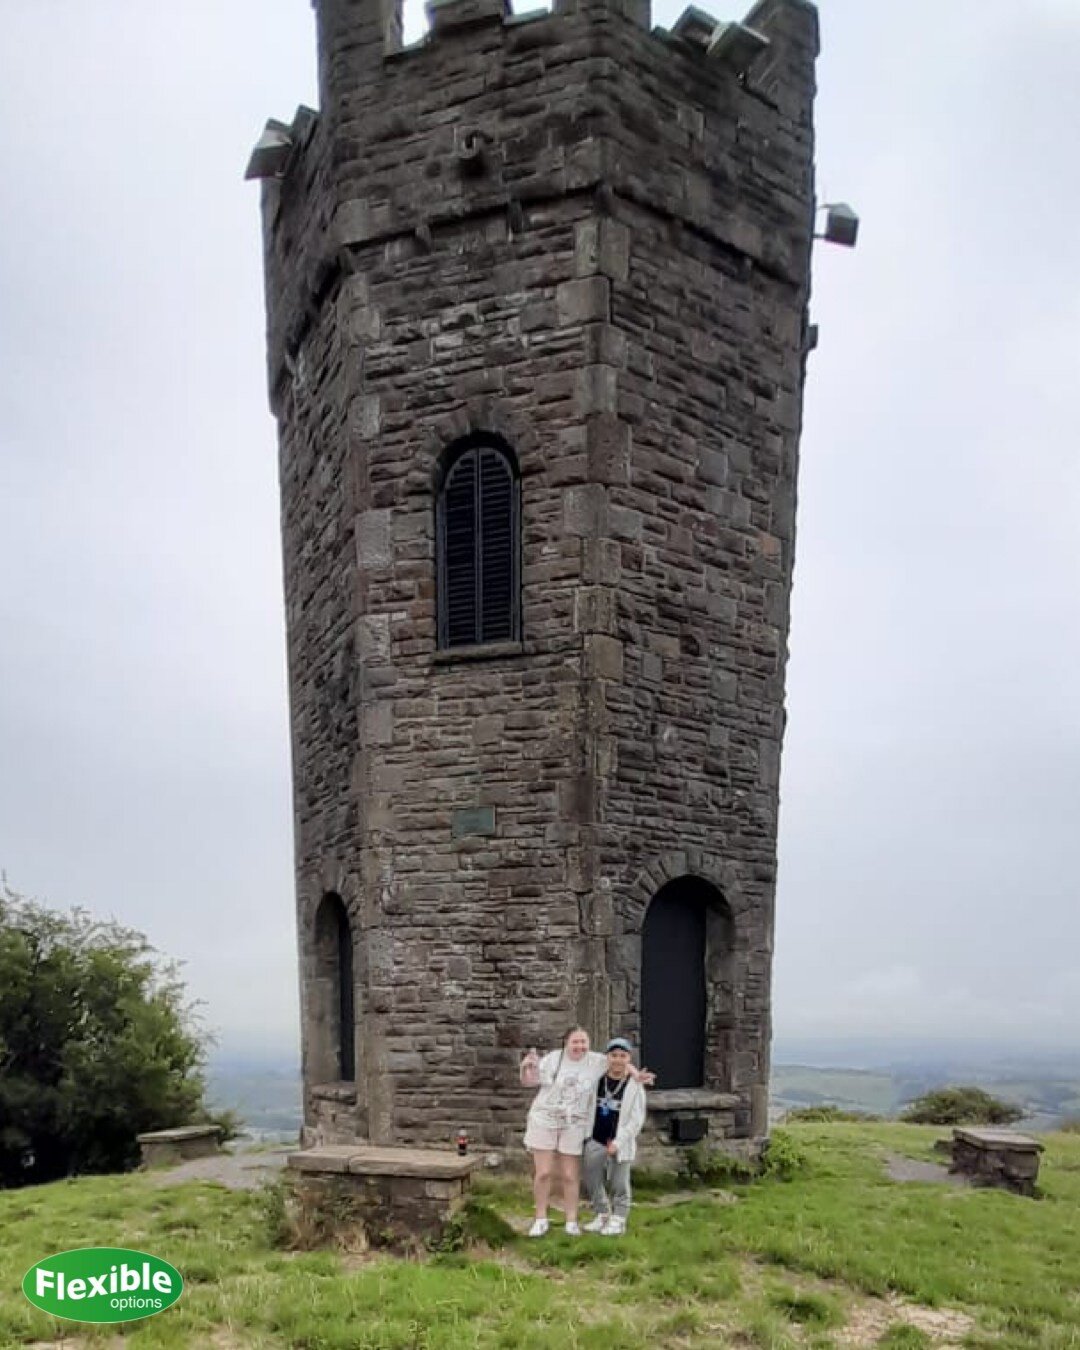 Jade and Alex have been on a proper walking mission. They made it up the Folly in Pontypool. Fair play both, that's serious.

#walking #pontypool #folly #explore #wales